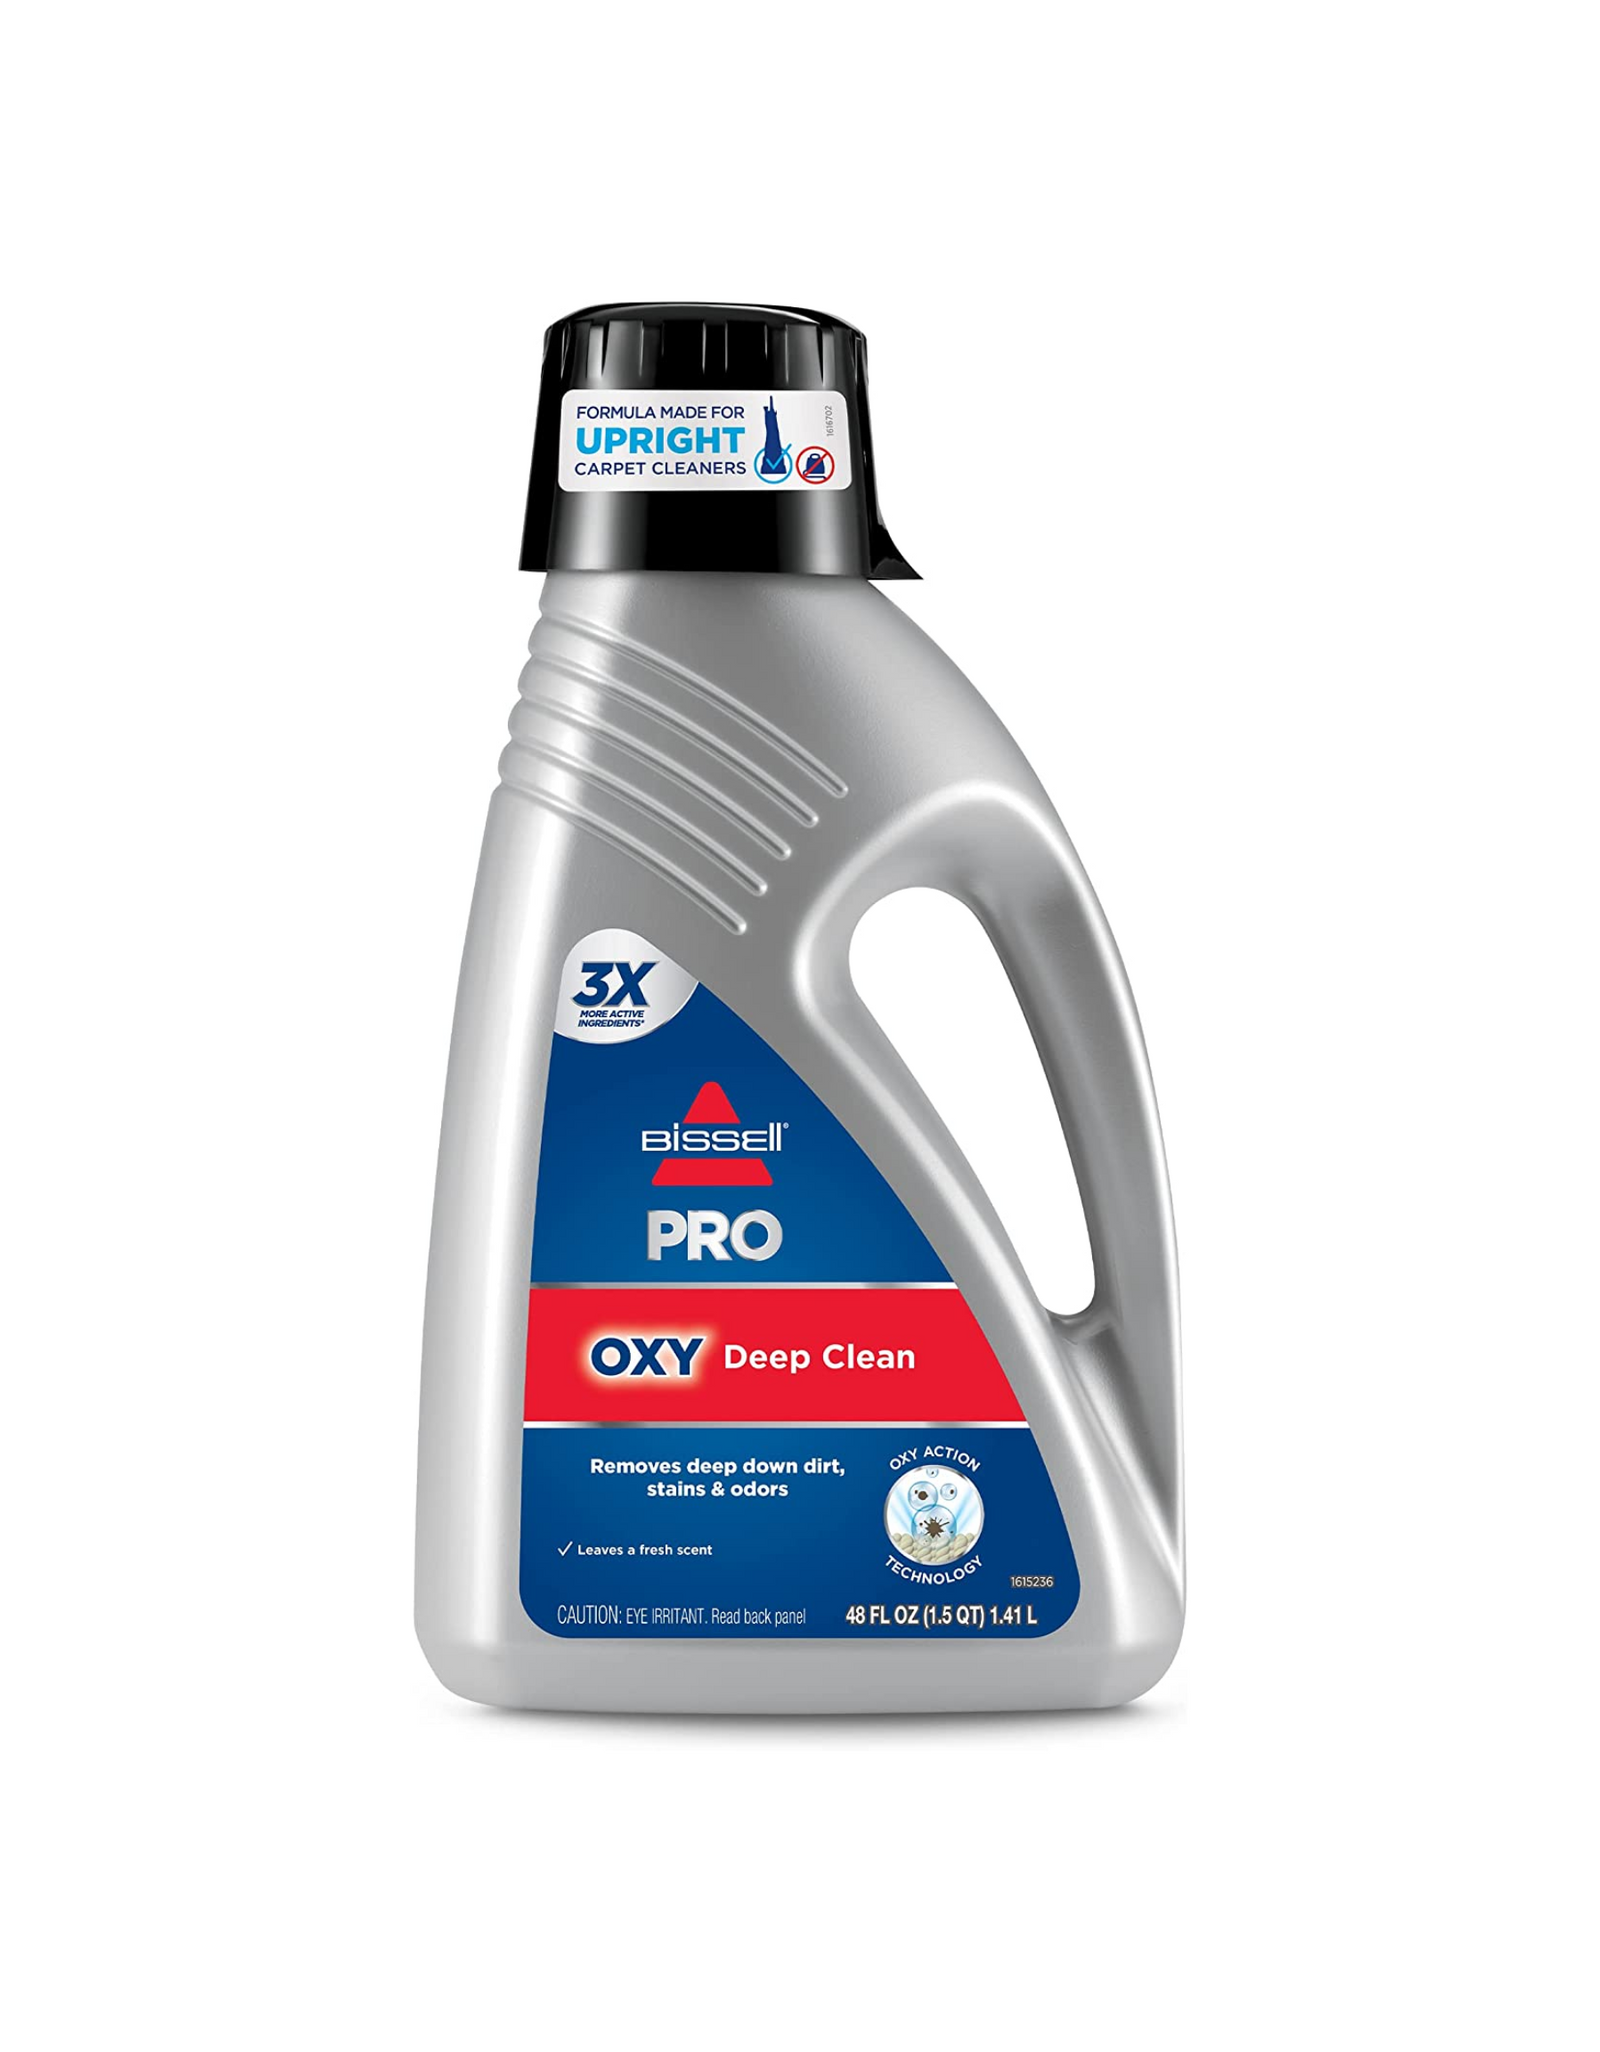 BISSELL PRO OXY Deep Clean(3156), Removes Deep Down Dirt, Stains & Odors, 48 fl oz